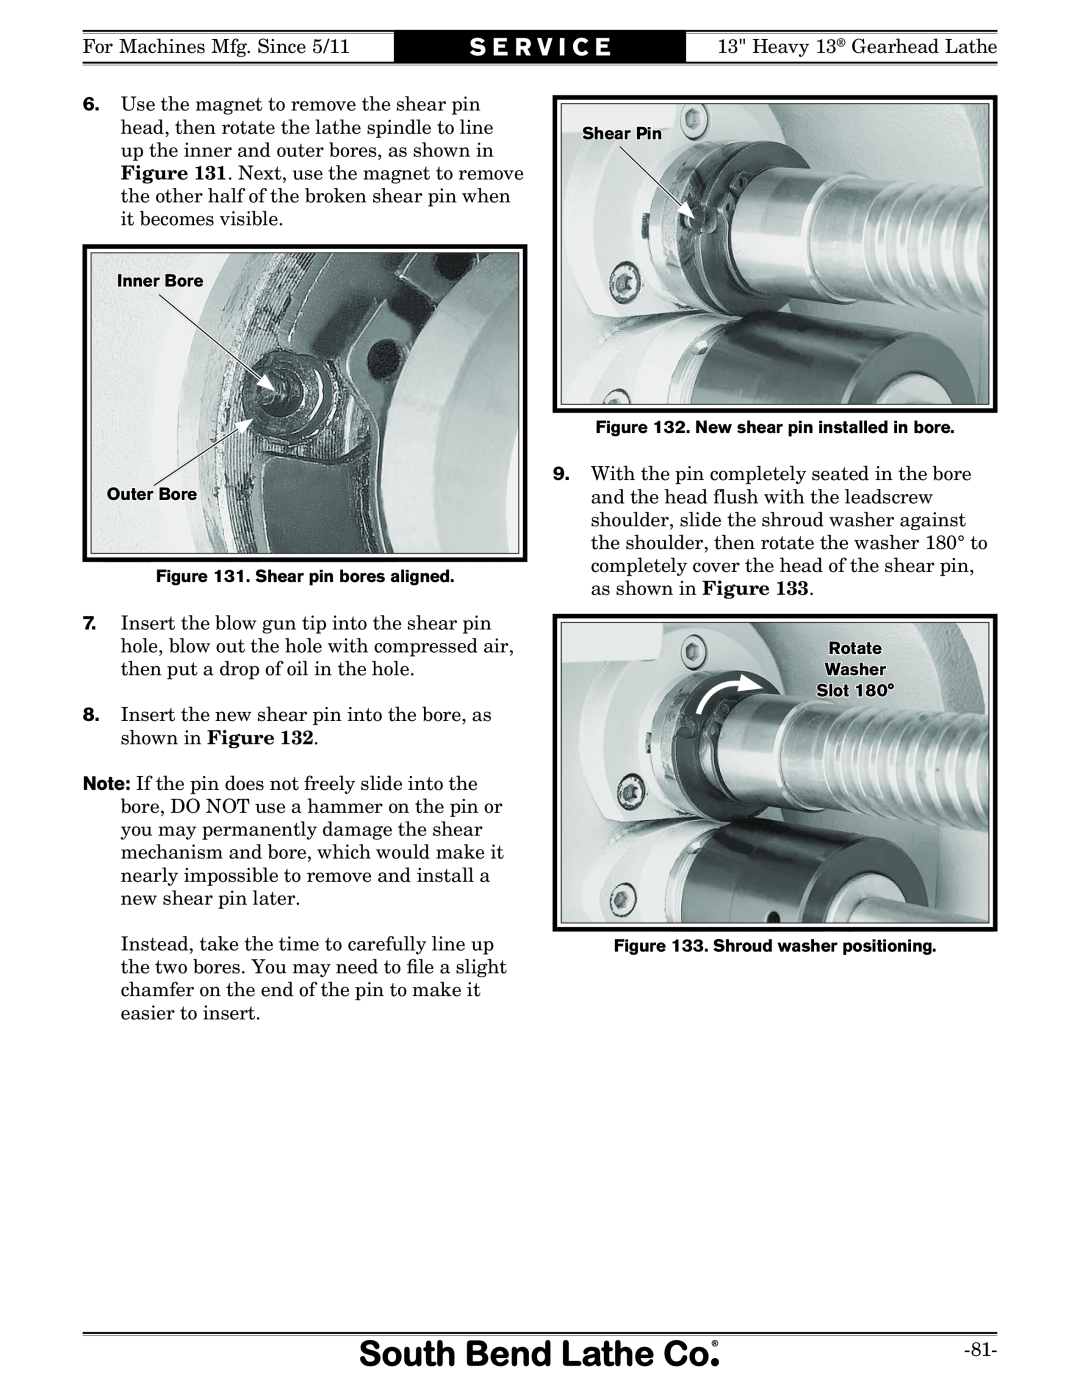 Southbend SB S E R V I C E, Inner Bore Outer Bore . Shear pin bores aligned, Shear Pin . New shear pin installed in bore 